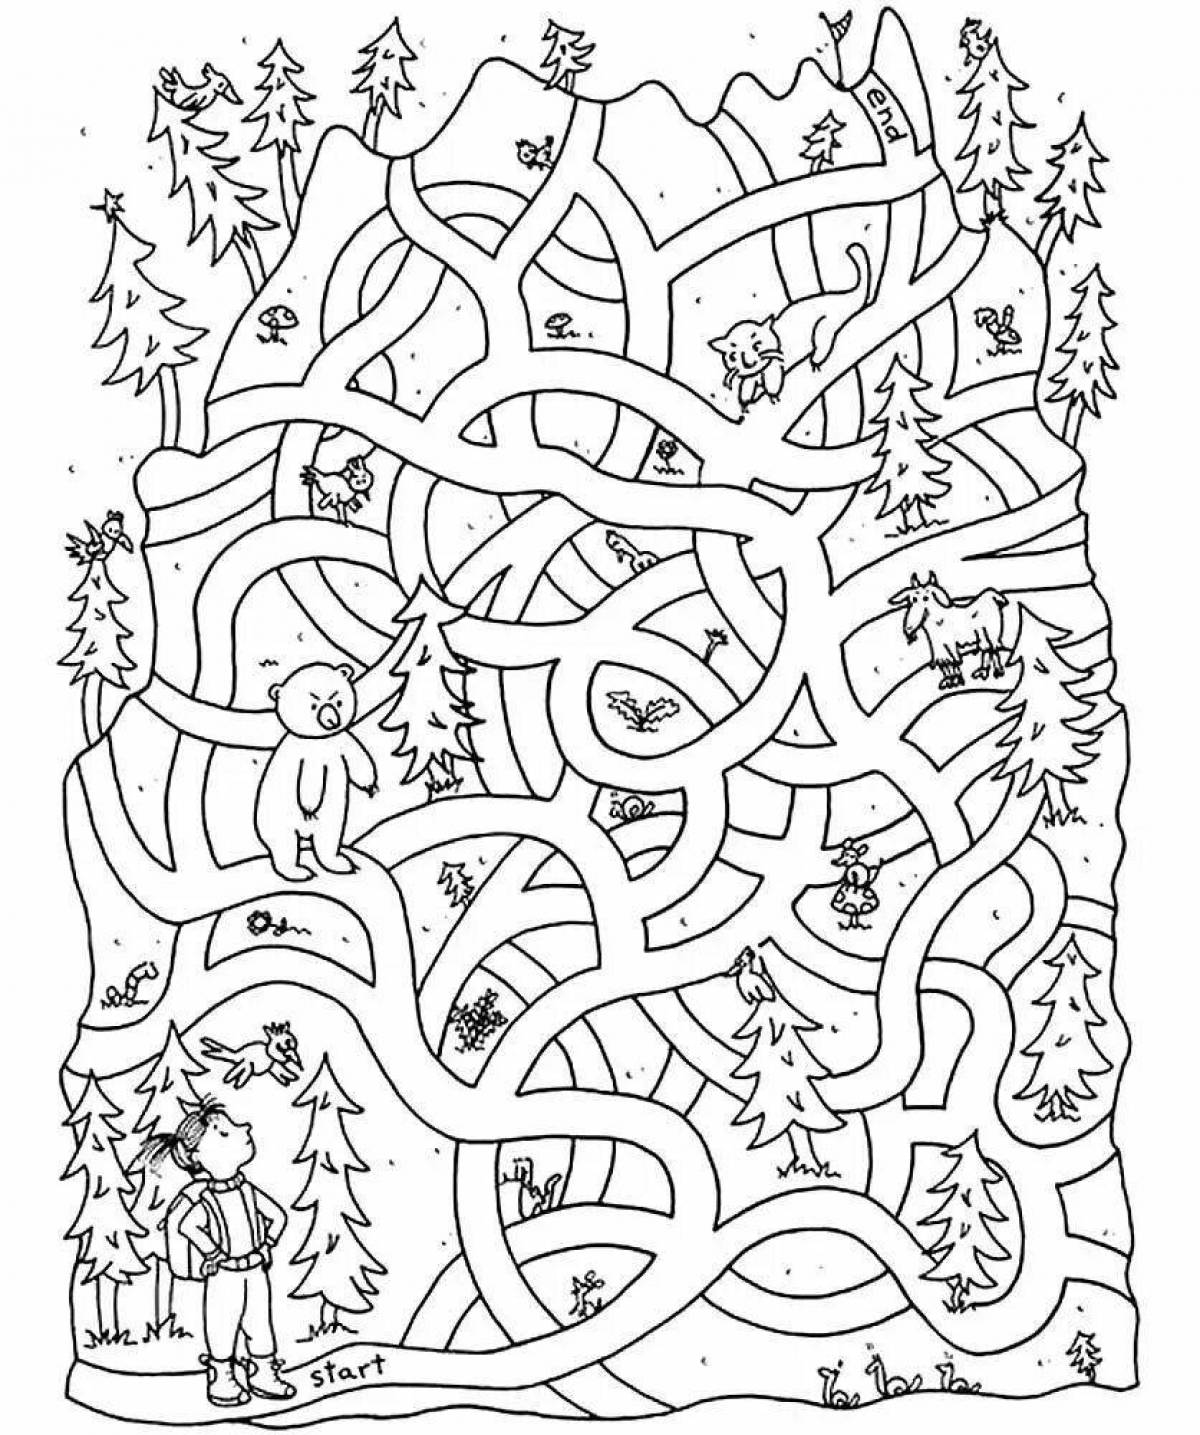 Entertaining puzzle coloring book for 10 year olds